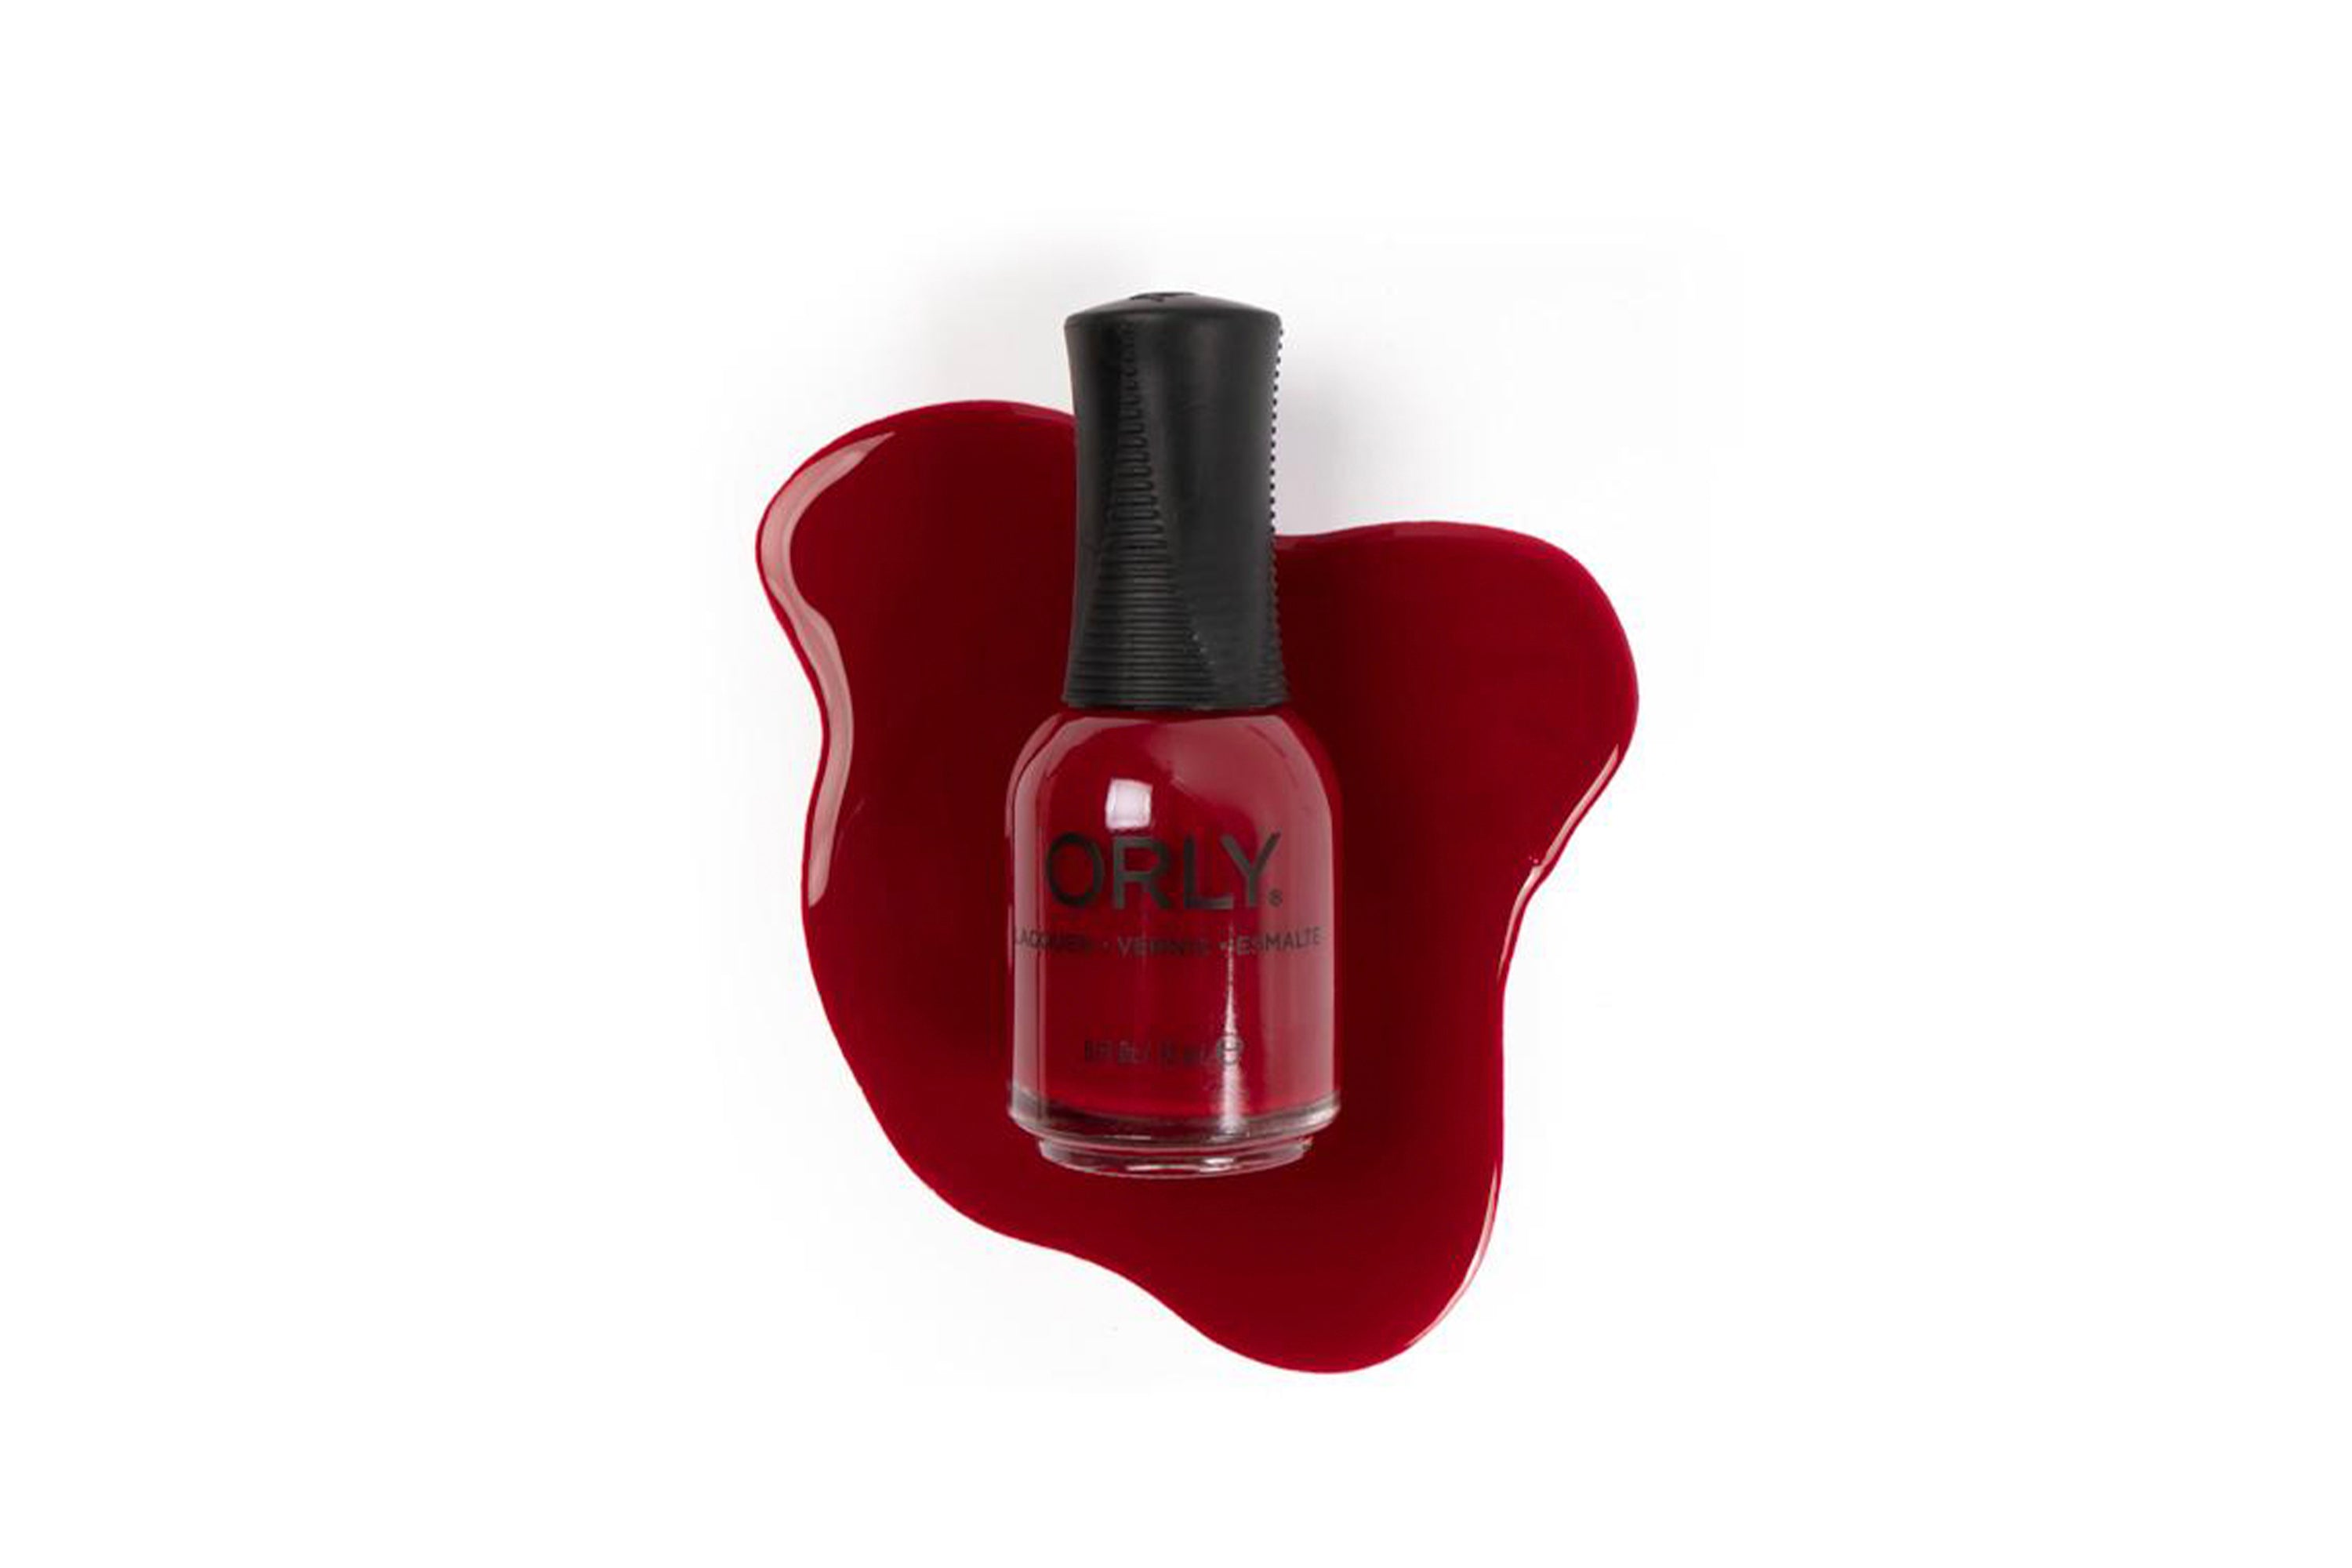 Orly Nail Lacquer - String of Hearts